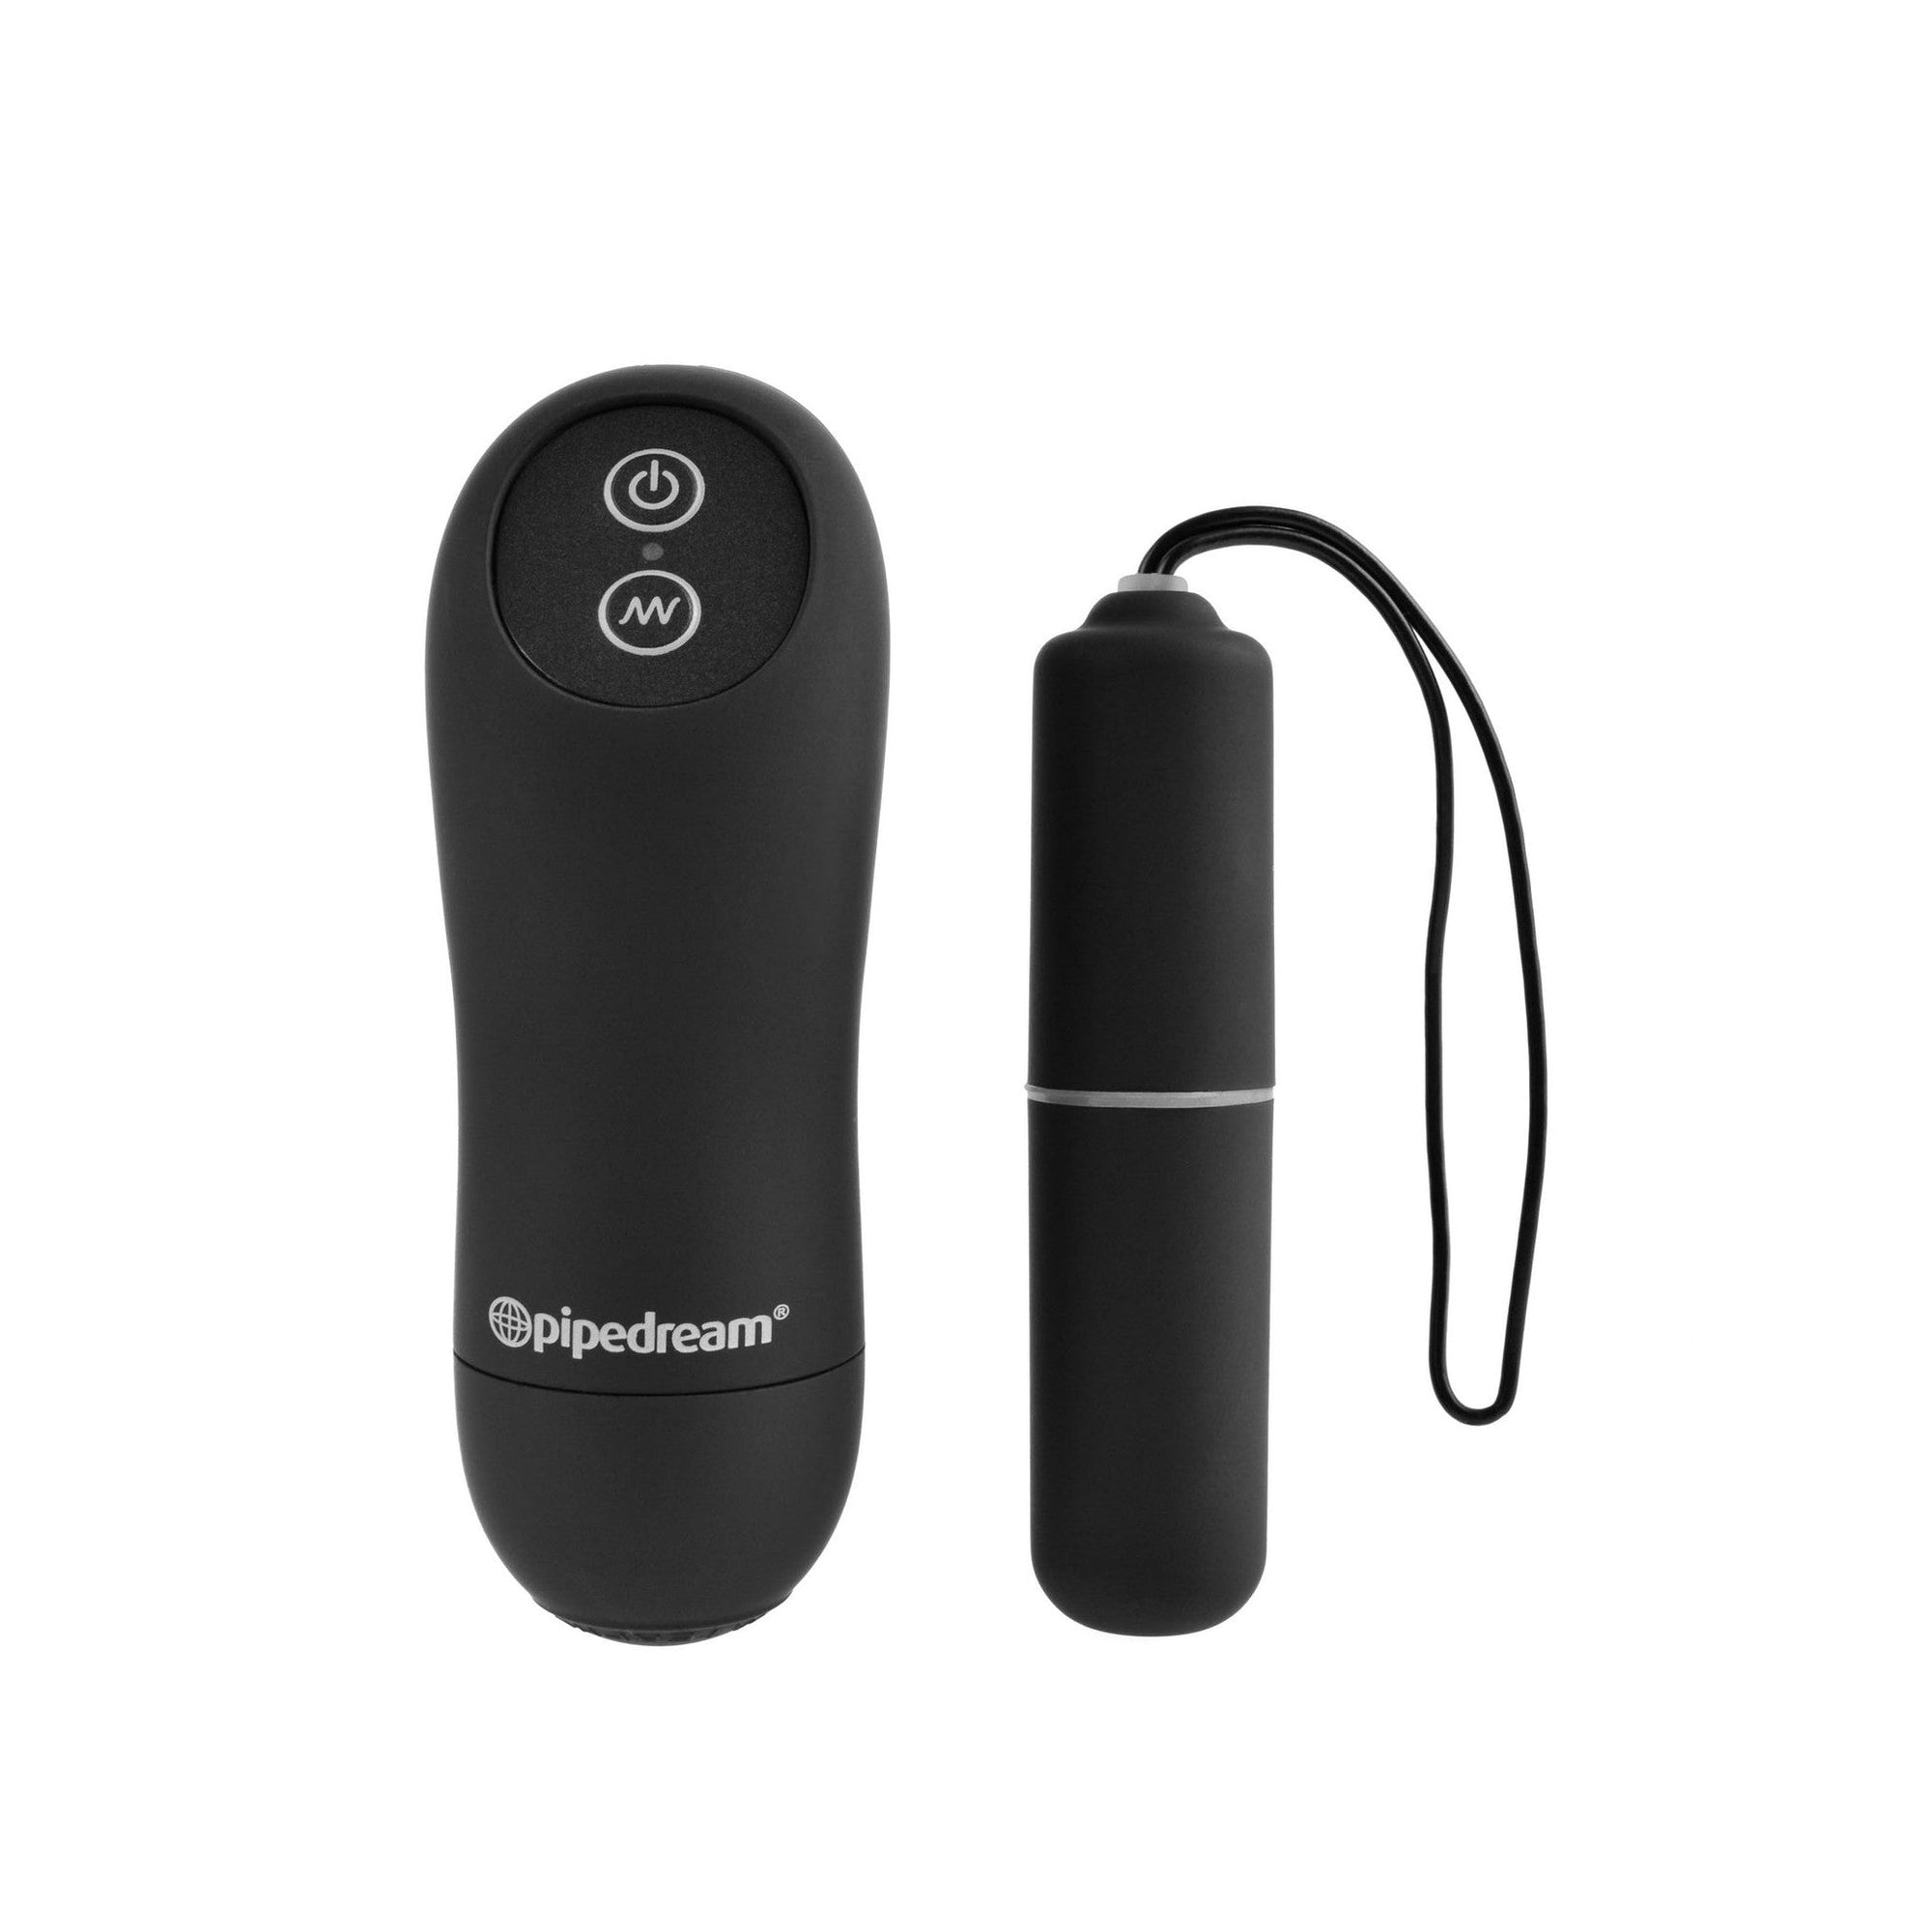 Pipedream - Fetish Fantasy Limited Edition Remote Control Vibrating Panties -  Panties Massager Remote Control (Vibration) Non Rechargeable  Durio.sg